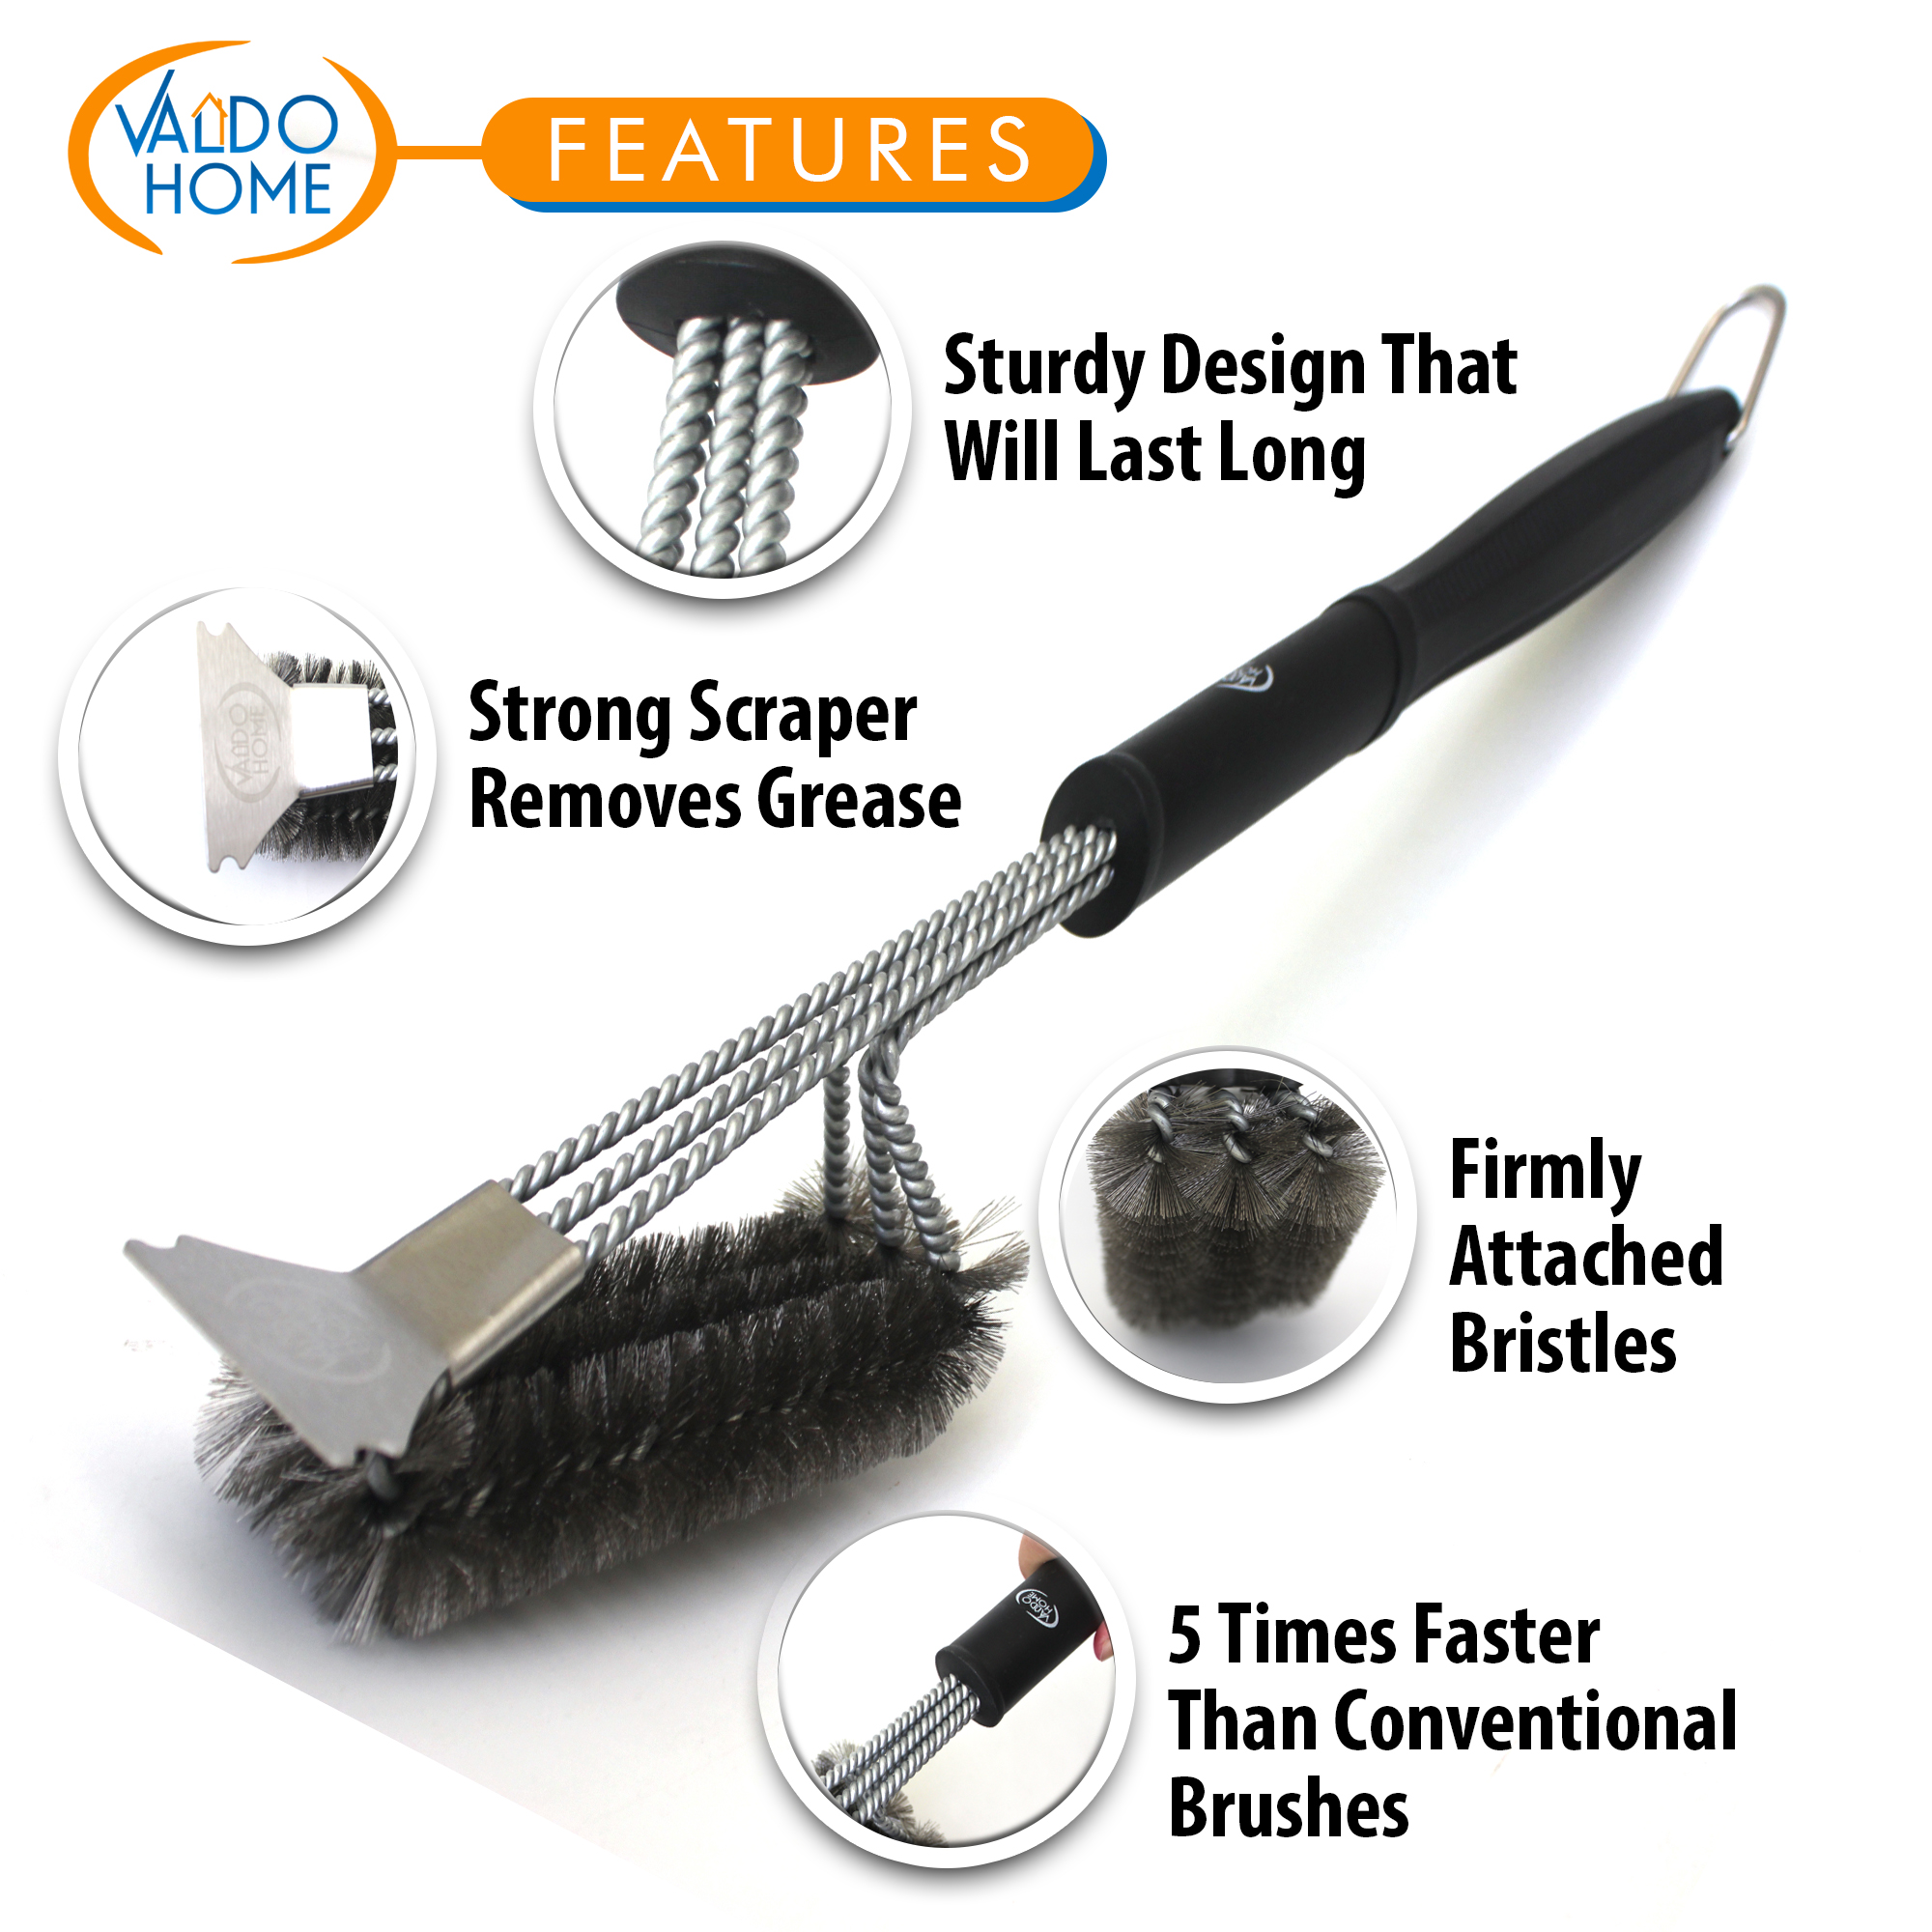 8 Inch Grill Brush and Scraper Stainless Steel Wire Grill Brush Extra  Strong BBQ Cleaner Accessories Heavy Duty Barbecue Grill Cleaning Brush  Grill Grate Brush Cleaner